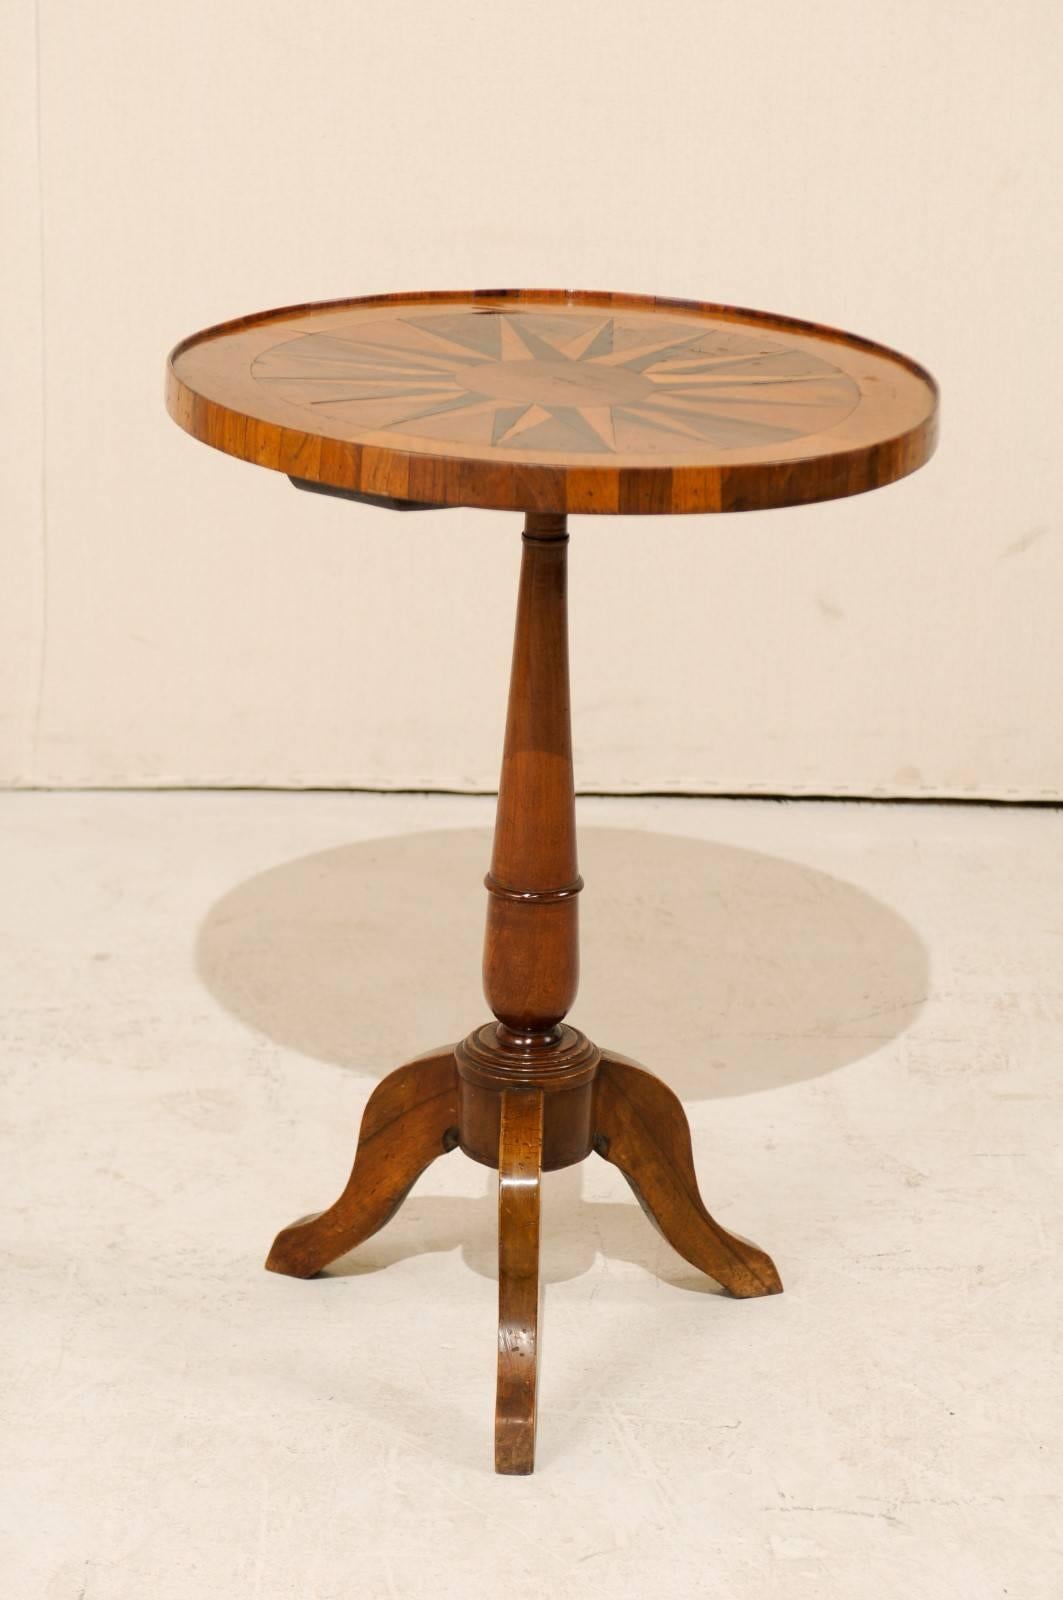 Stained Italian 19th Century Round Fruitwood Pedestal Table with Compass Star Inlay